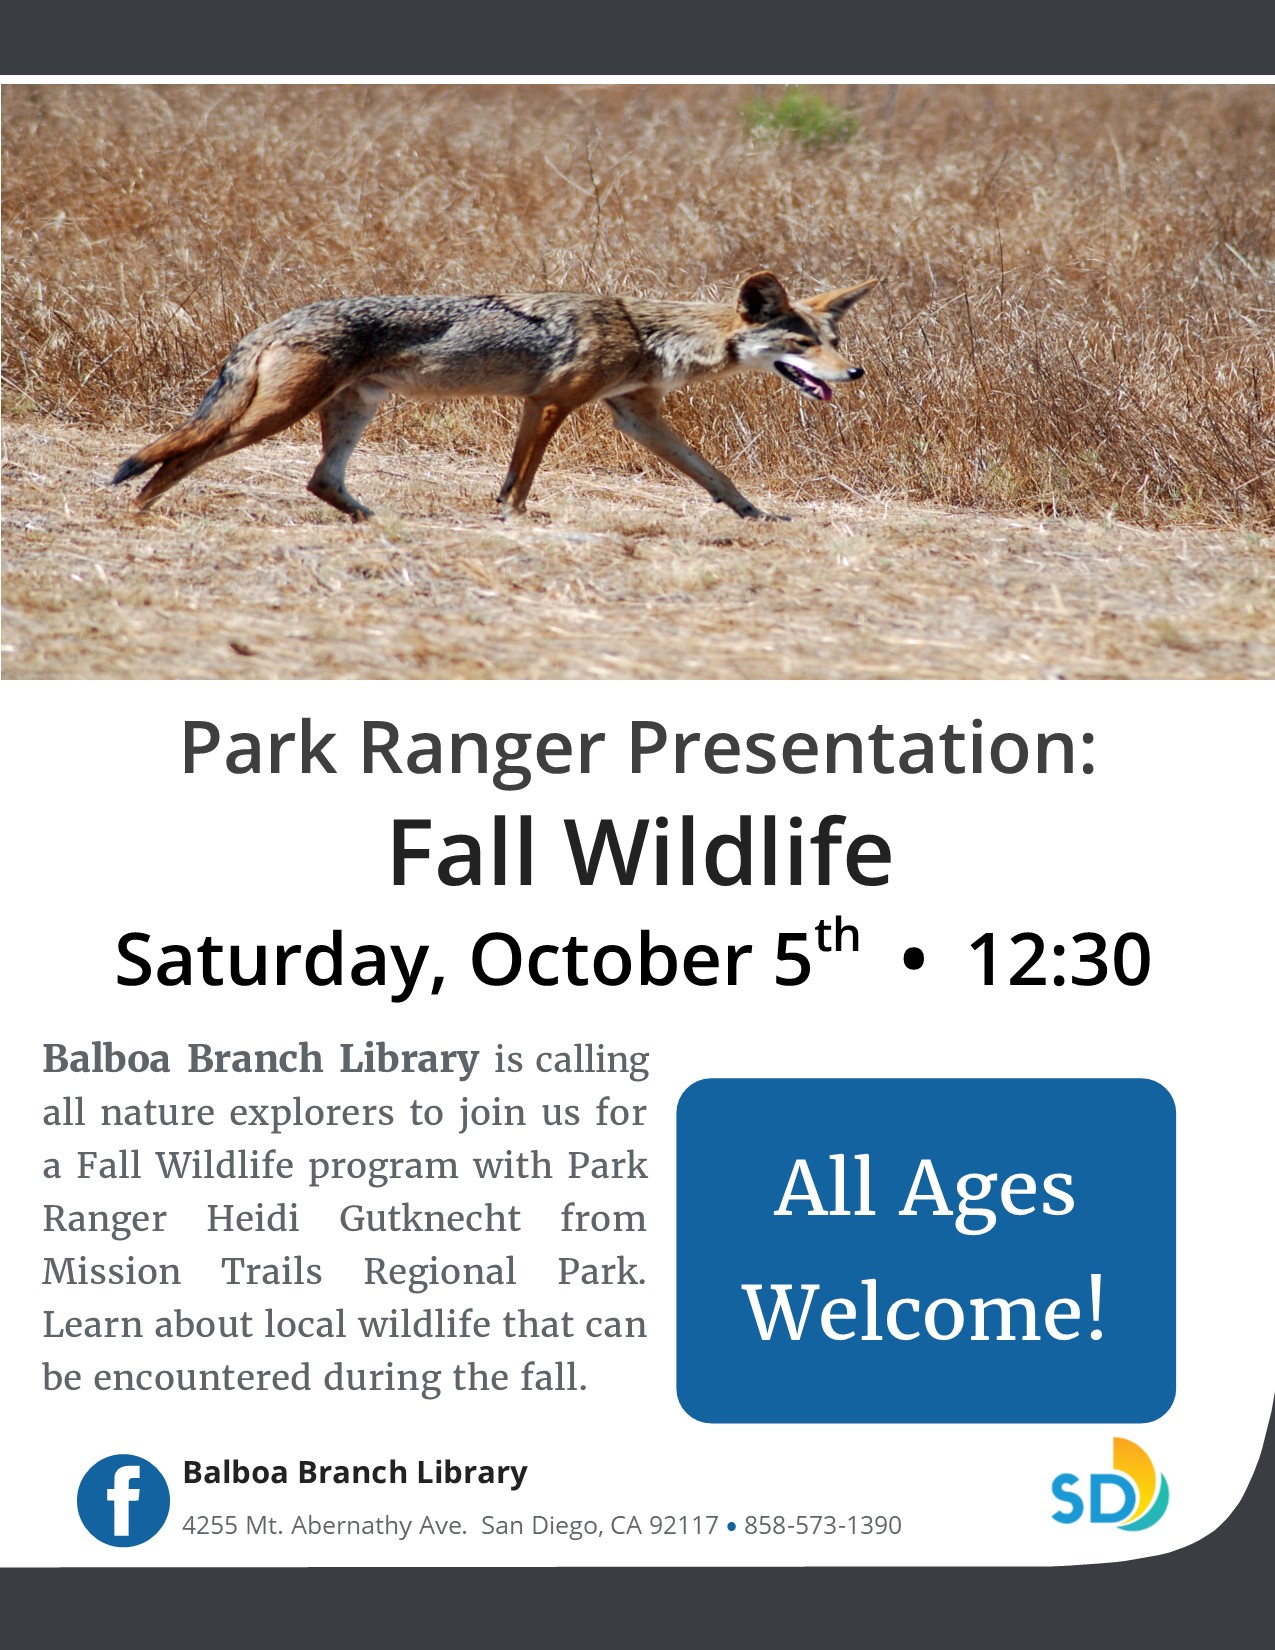 Park Ranger flyer with picture of coyote